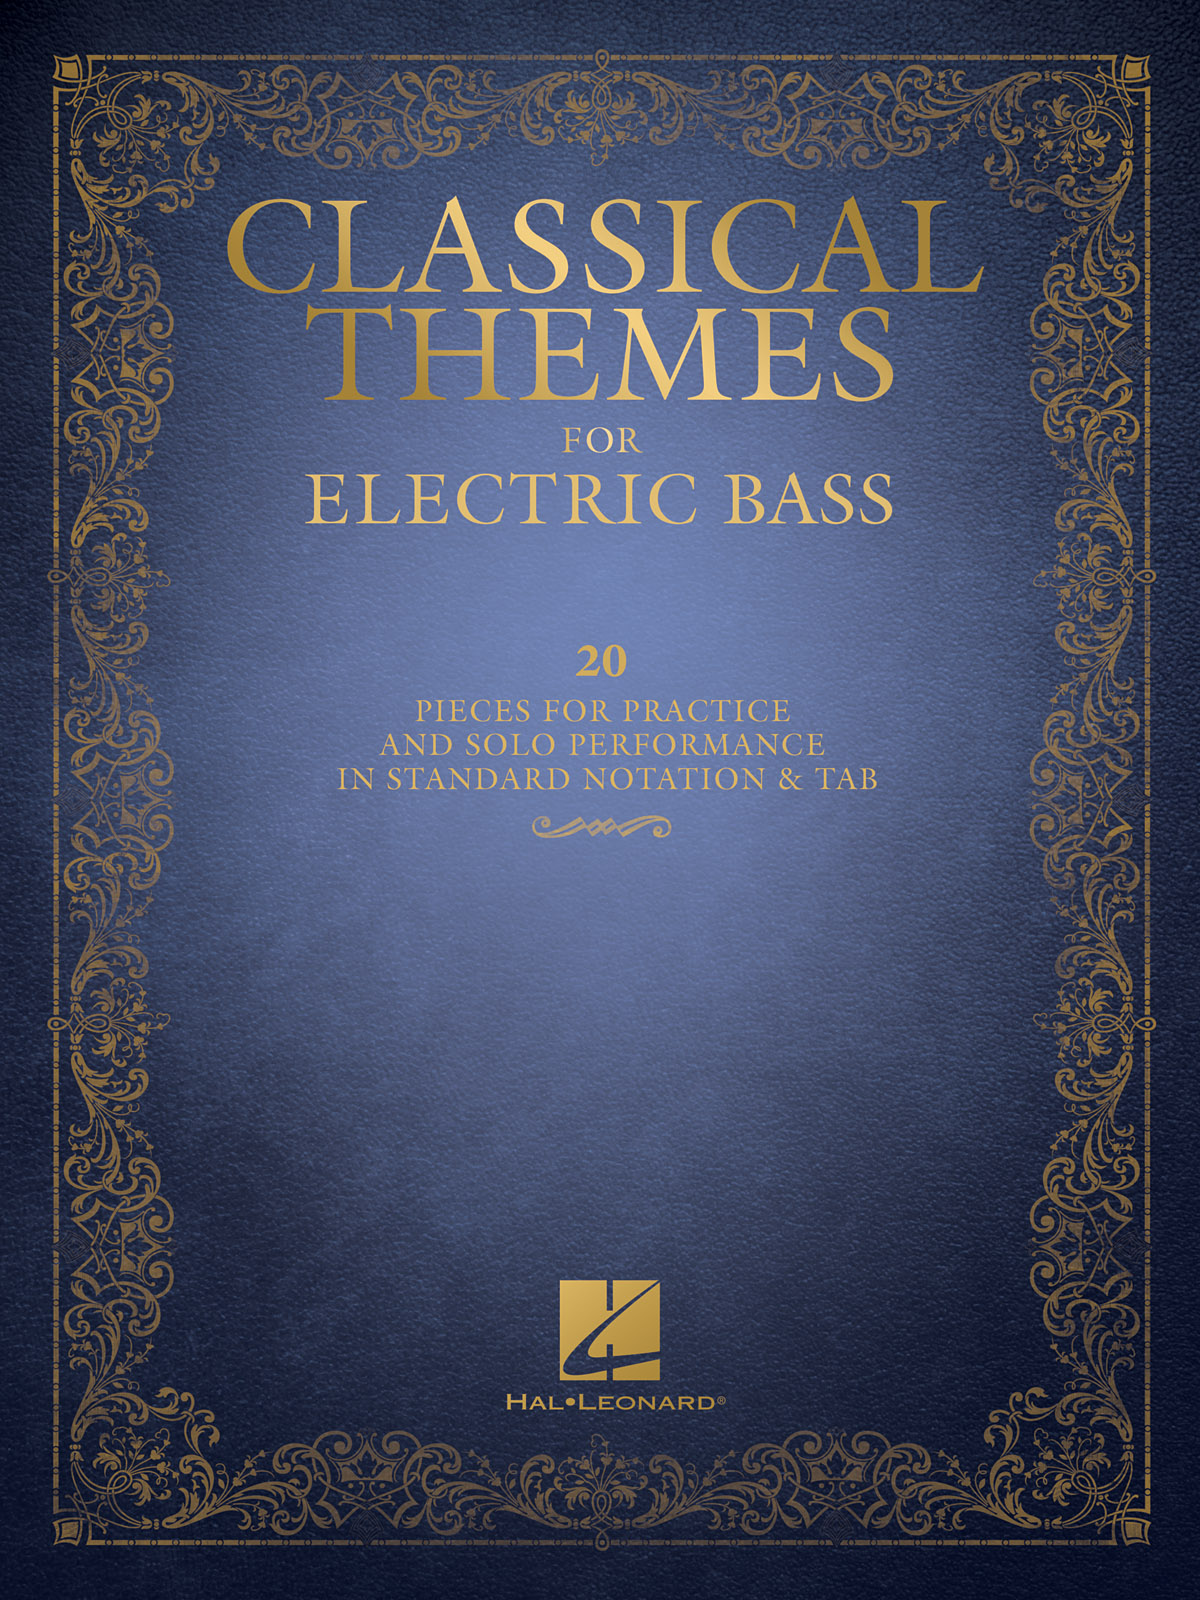 Classical Themes for Electric Bass - noty pro basovou kytaru